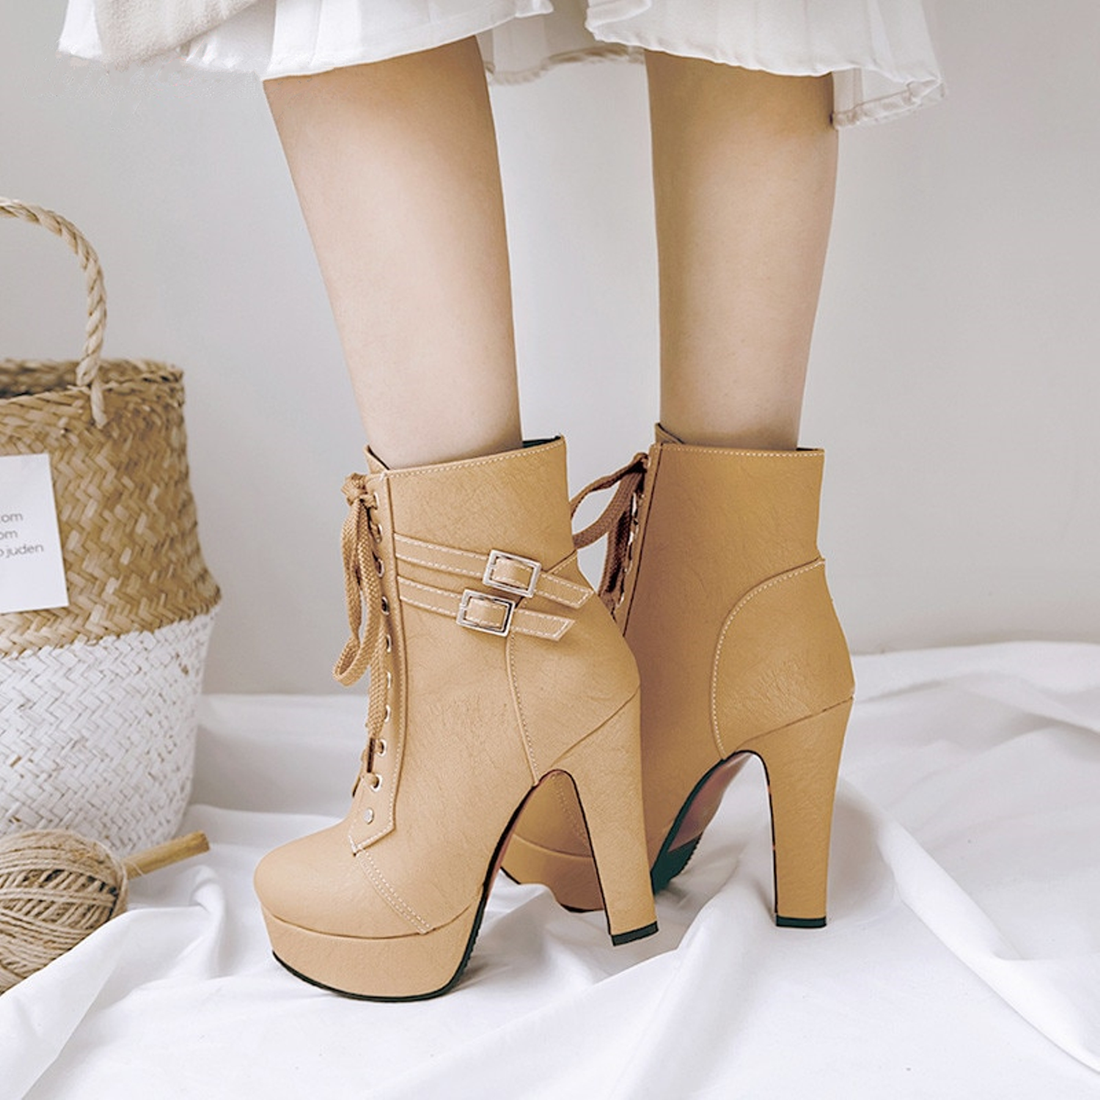 Women's Spring/Autumn High Heel Ankle Boots